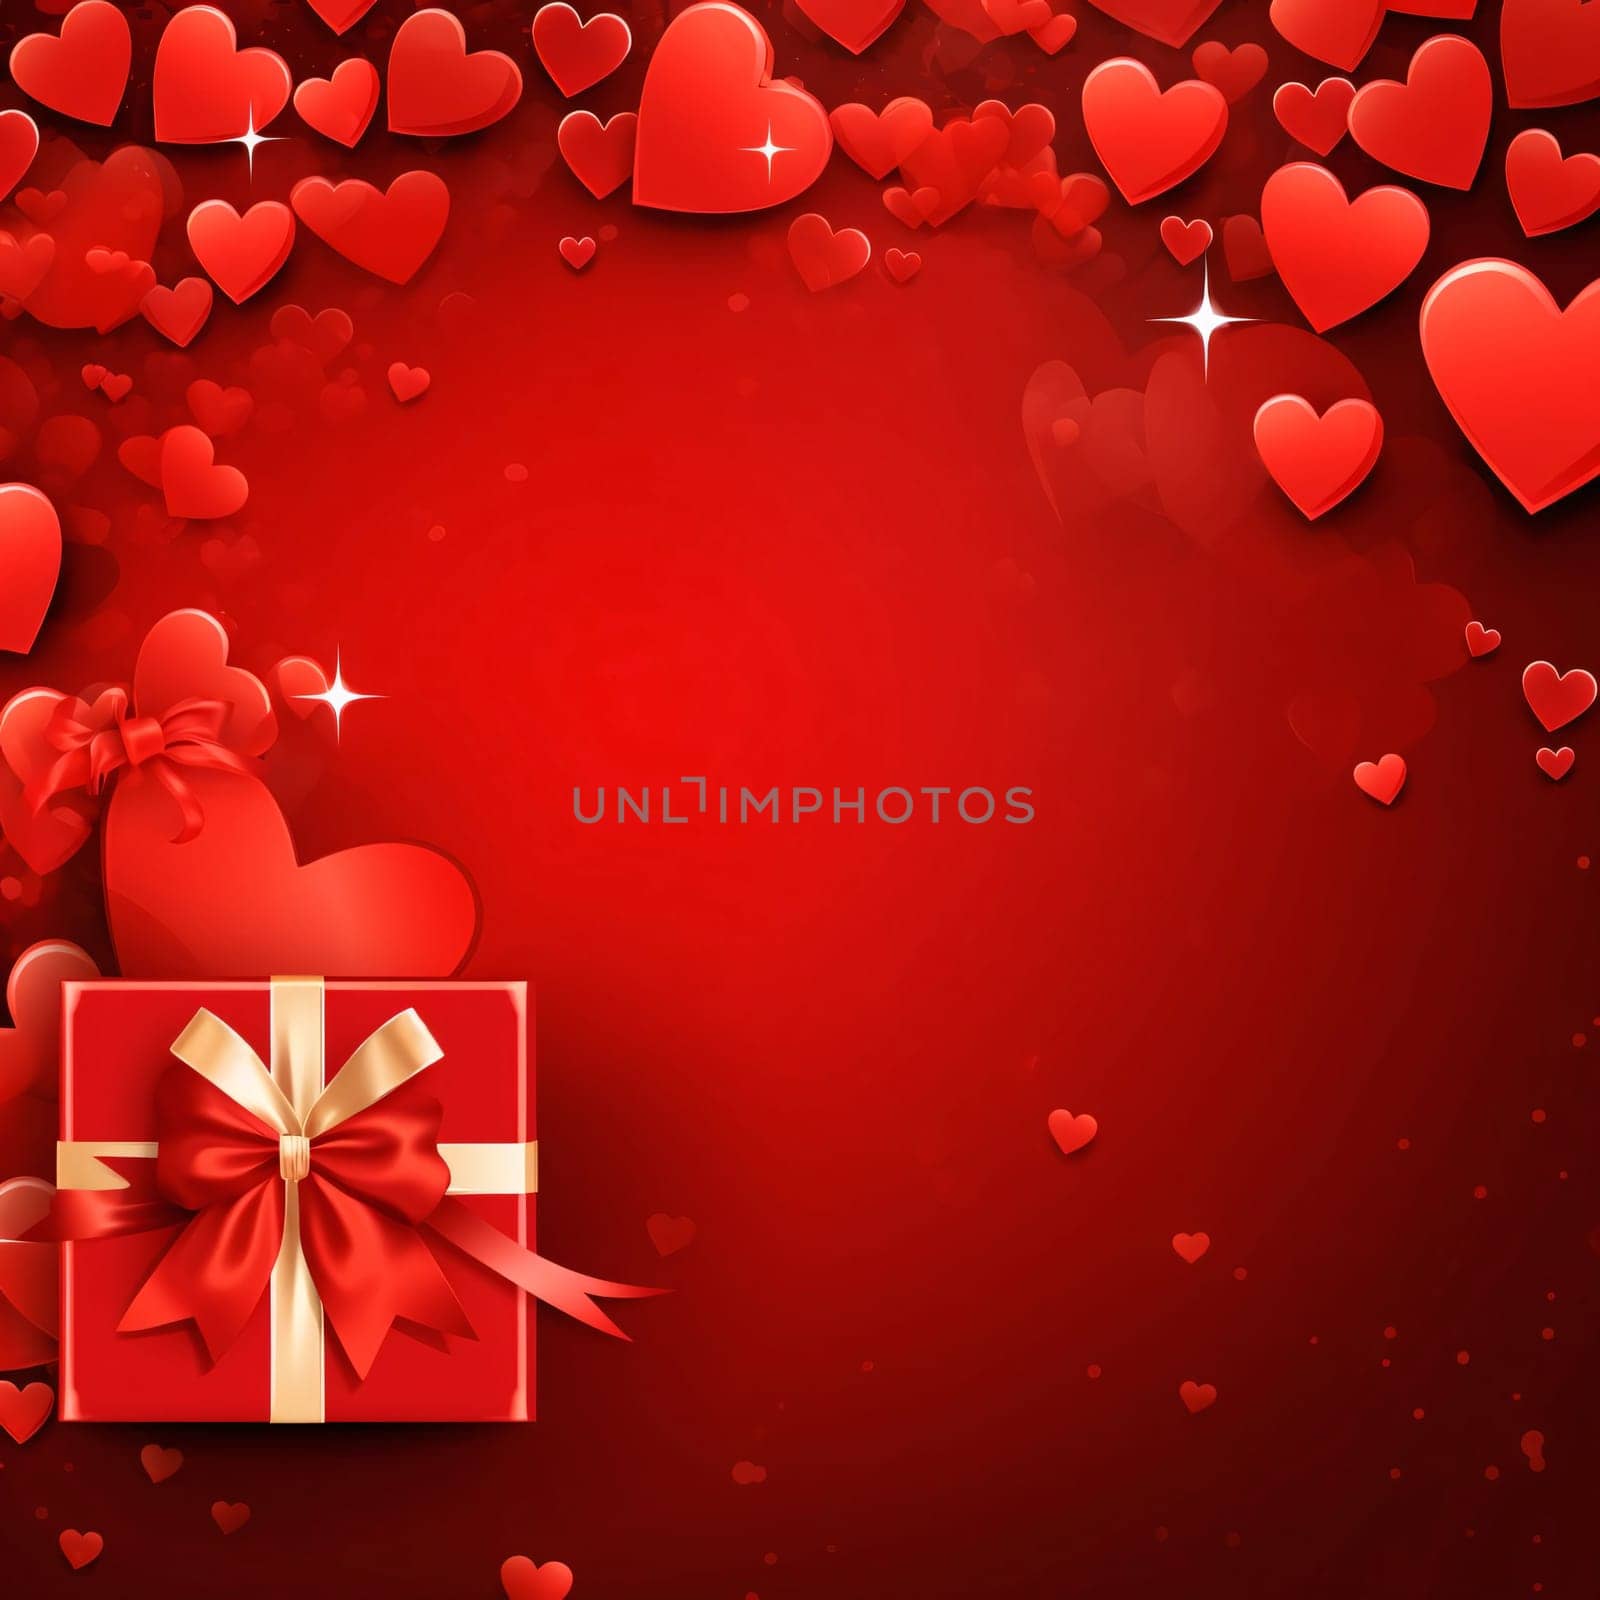 Red Valentine's Day card decorations with red hearts, gifts with bows.Valentine's Day banner with space for your own content. Heart as a symbol of affection and love.